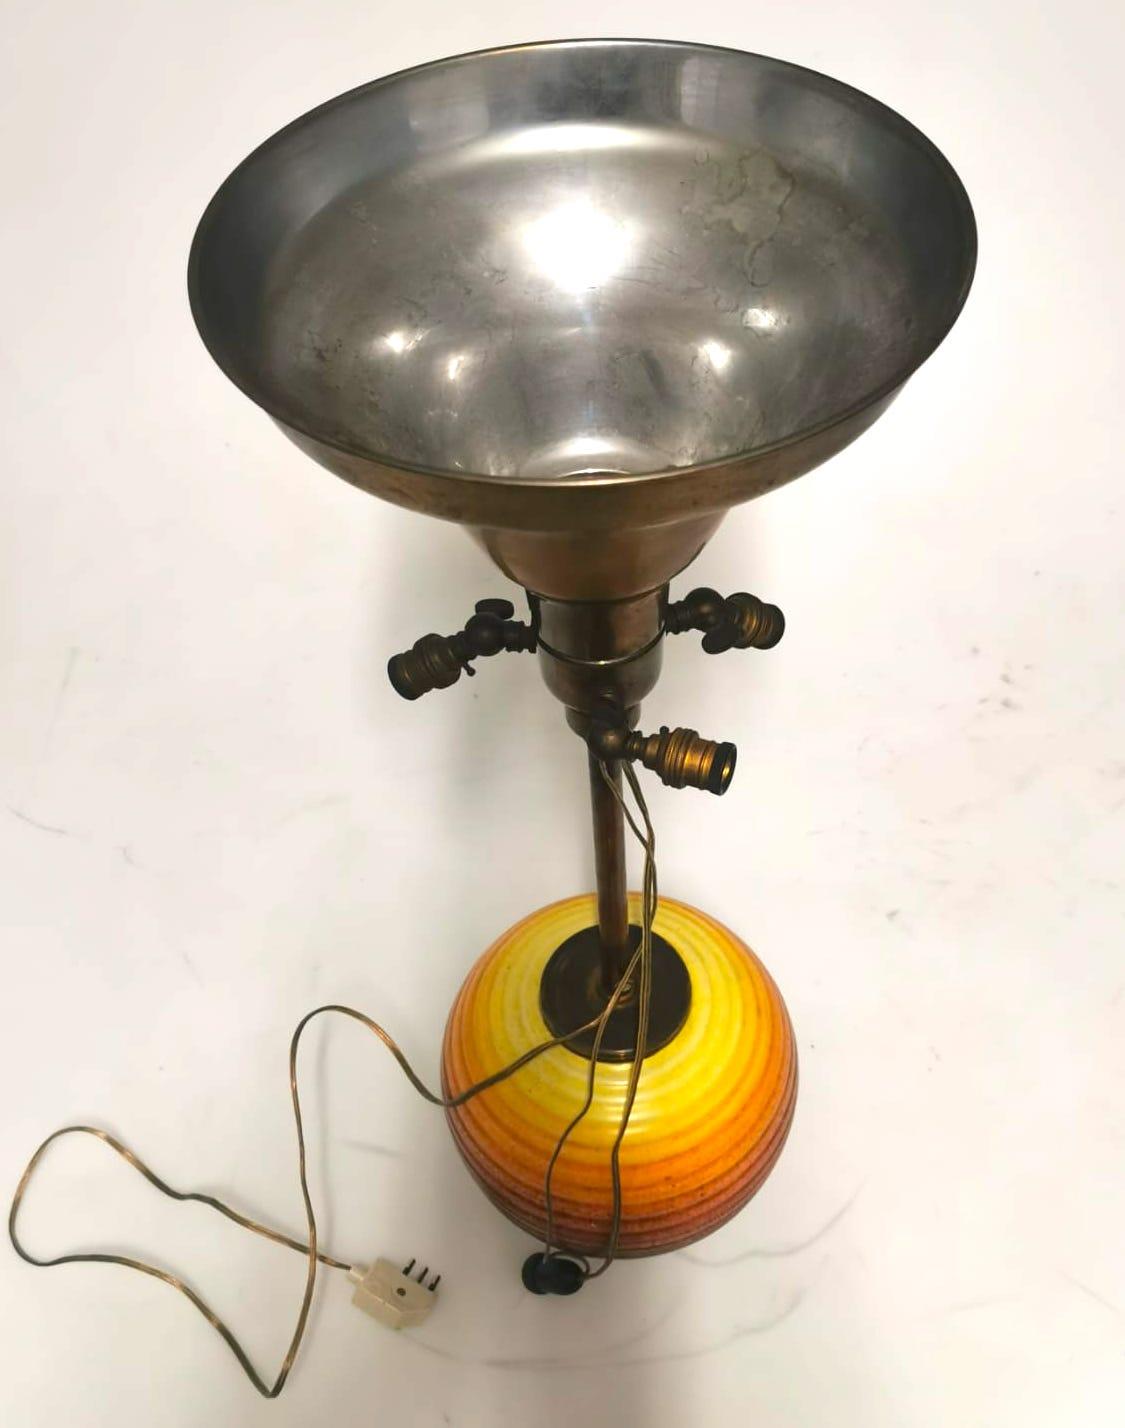 Precious table lamp, made in ochre glazed ceramic and brass, realized in 1930s.

In very good condition except for some signs of aging. 

With the ‘MGA’ brand.

This object is shipped from Italy. Under existing legislation, any object in Italy